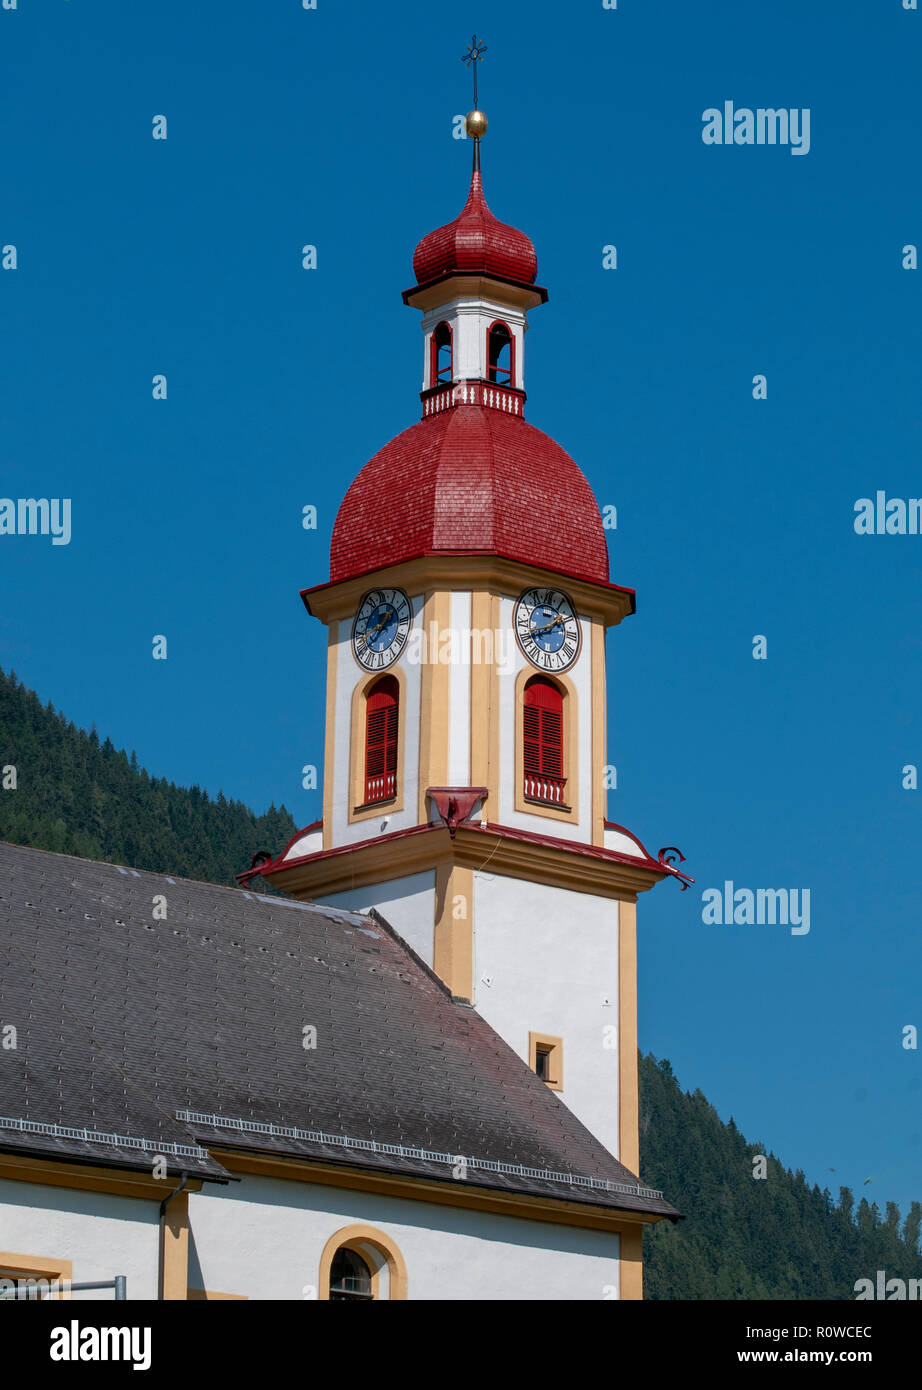 Neustift im Stubaital, the parish church of St. George in the town centre with a blue sky background, Tyrol, Austria Stock Photo